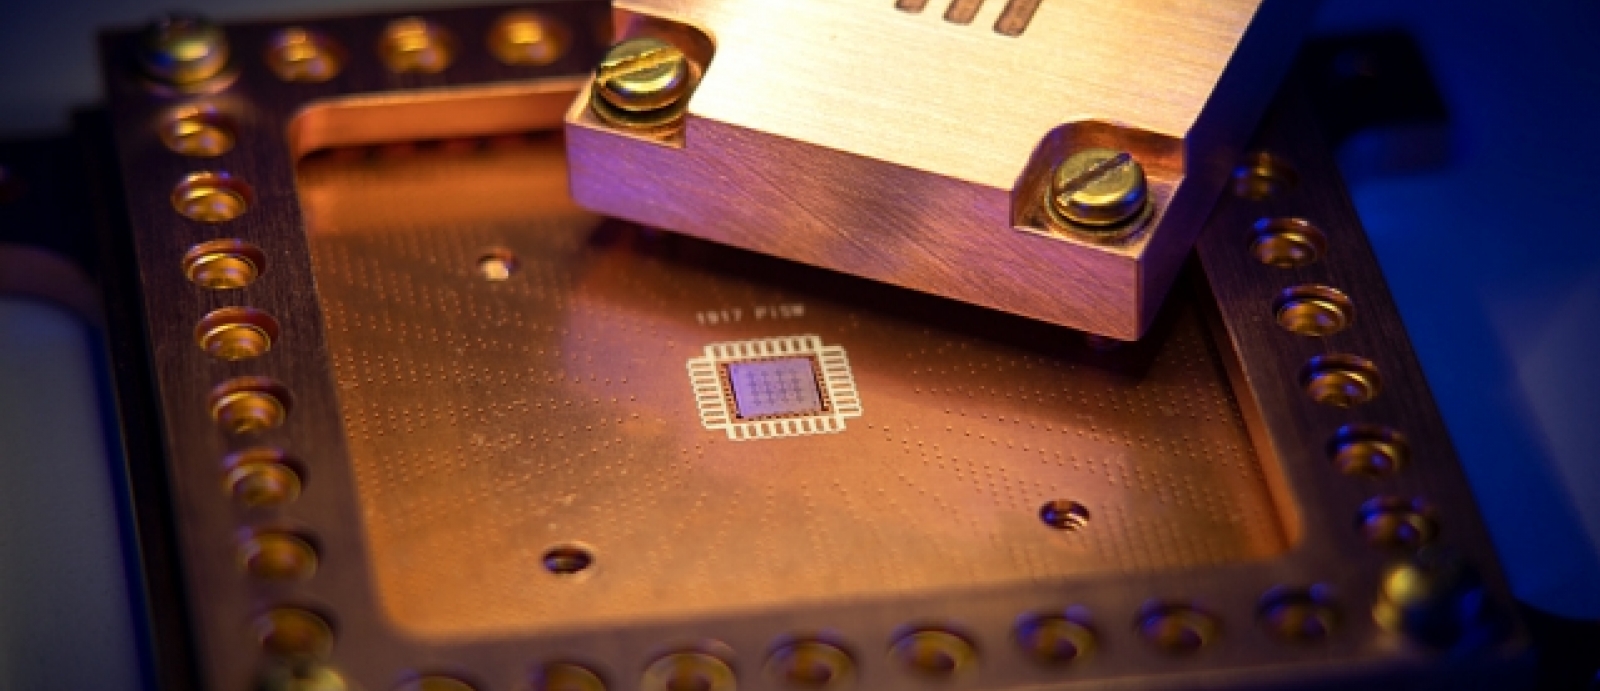 A photo of a computer chip with MIT etched into it